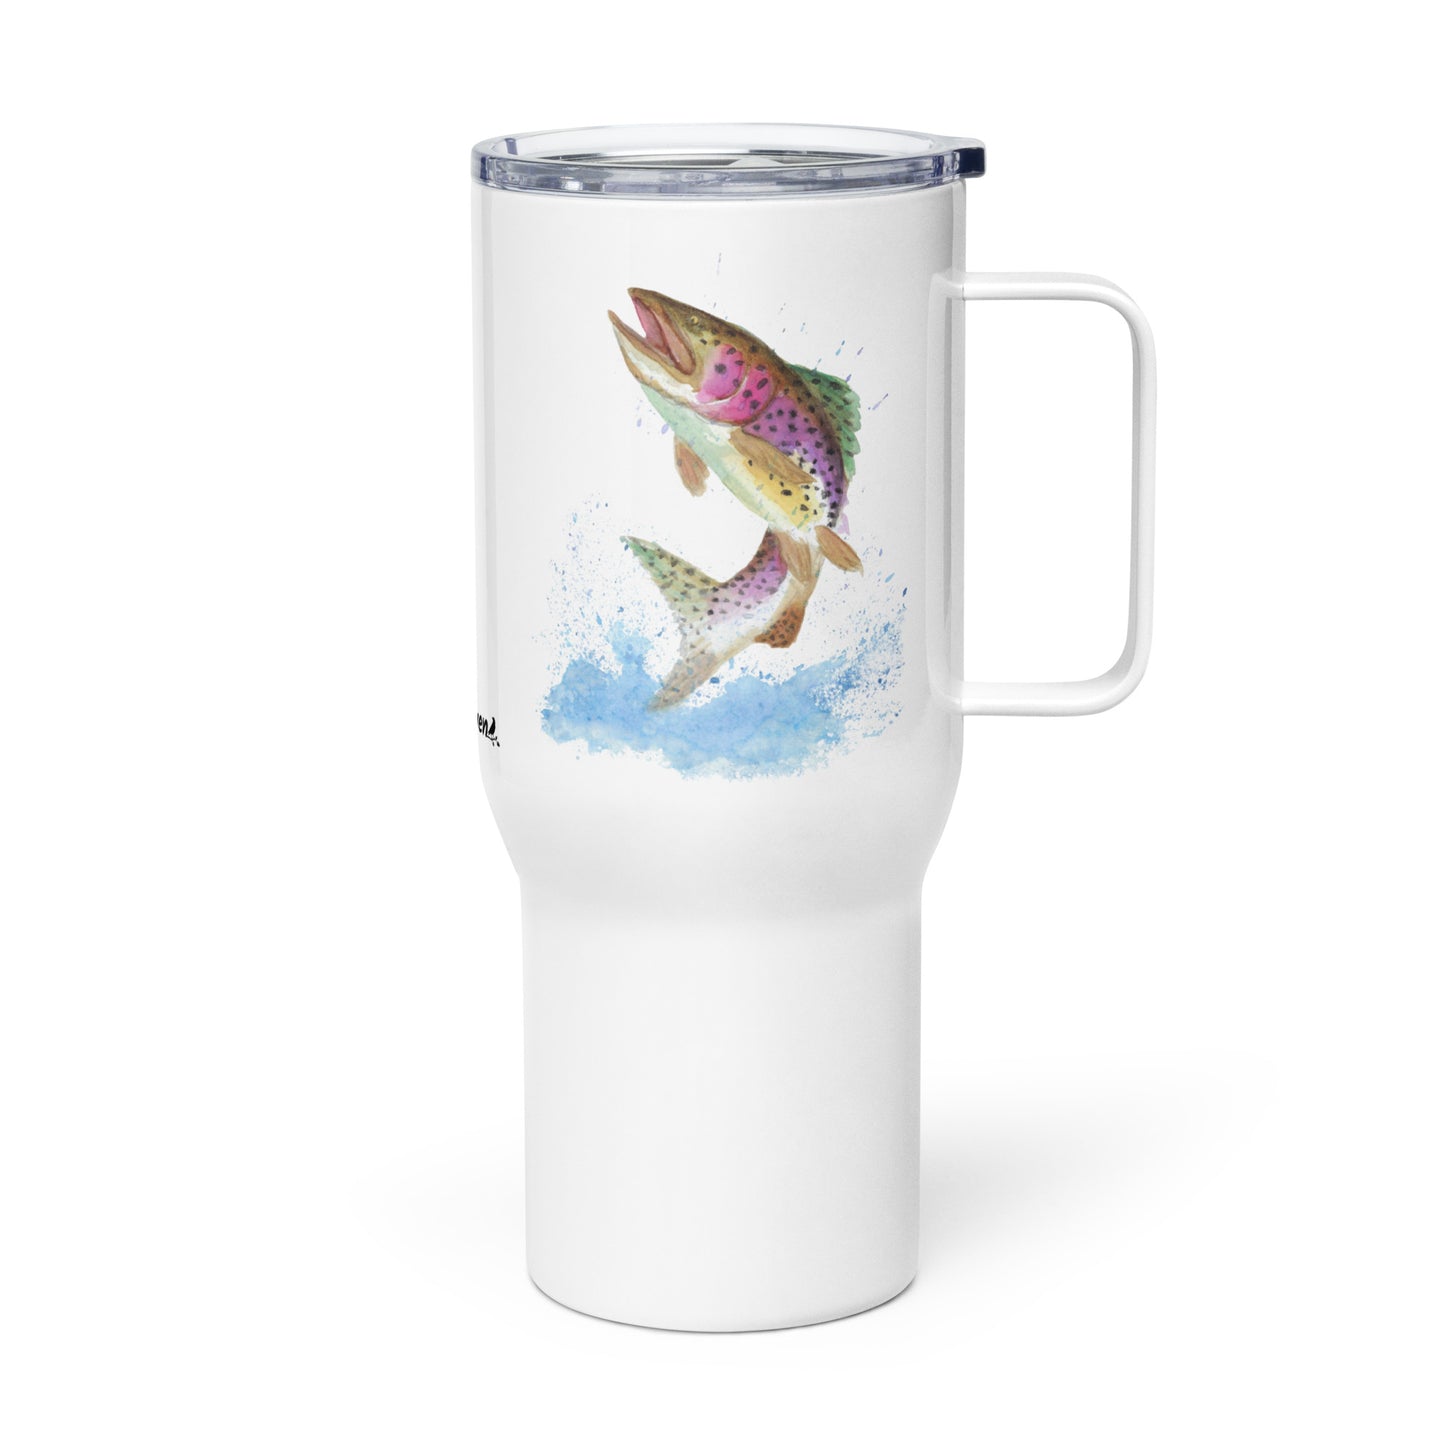 Stainless steel travel mug with handle. Holds 25 ounces of hot or cold drinks. Has print of watercolor rainbow trout fish on both sides. Fits most car cup holders. Comes with spill-proof BPA-free plastic lid.  Shown with handle facing right.